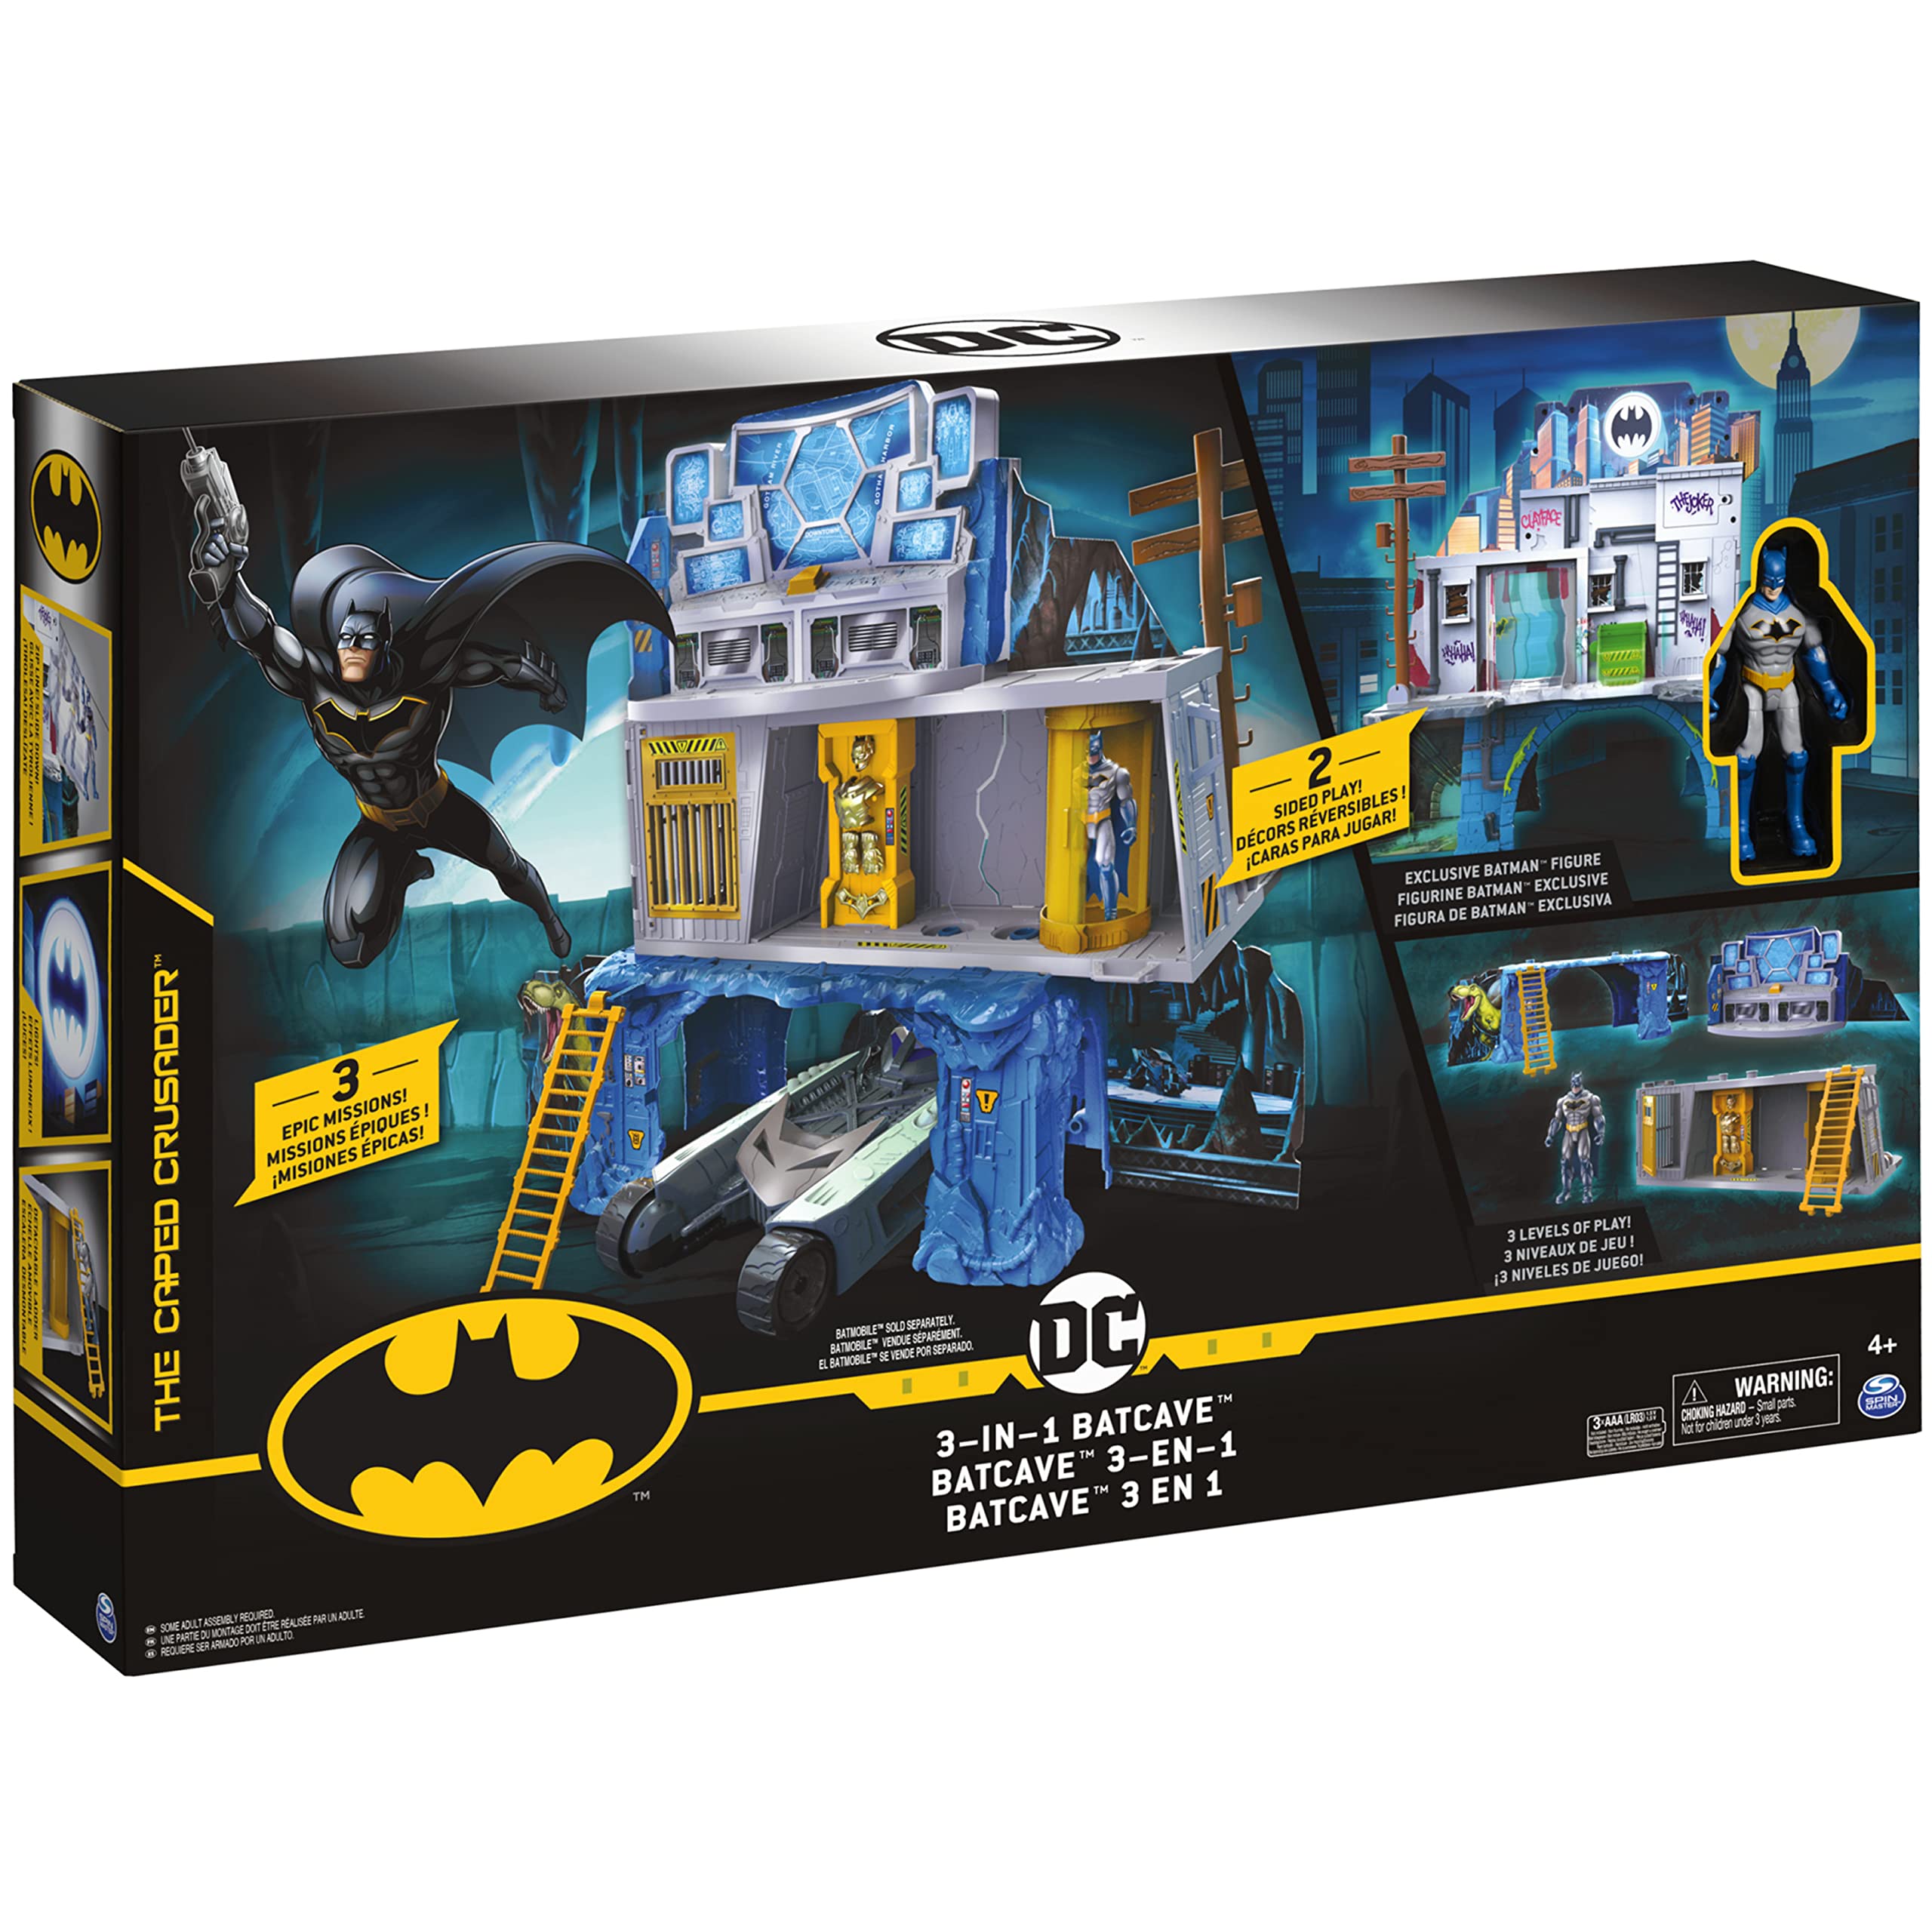 Mua DC Comics Batman 3-in-1 Batcave Playset with Exclusive 4-inch Batman  Action Figure and Battle Armor, Gift Ideas for Your Holiday Toy List 2021  trên Amazon Mỹ chính hãng 2023 | Giaonhan247